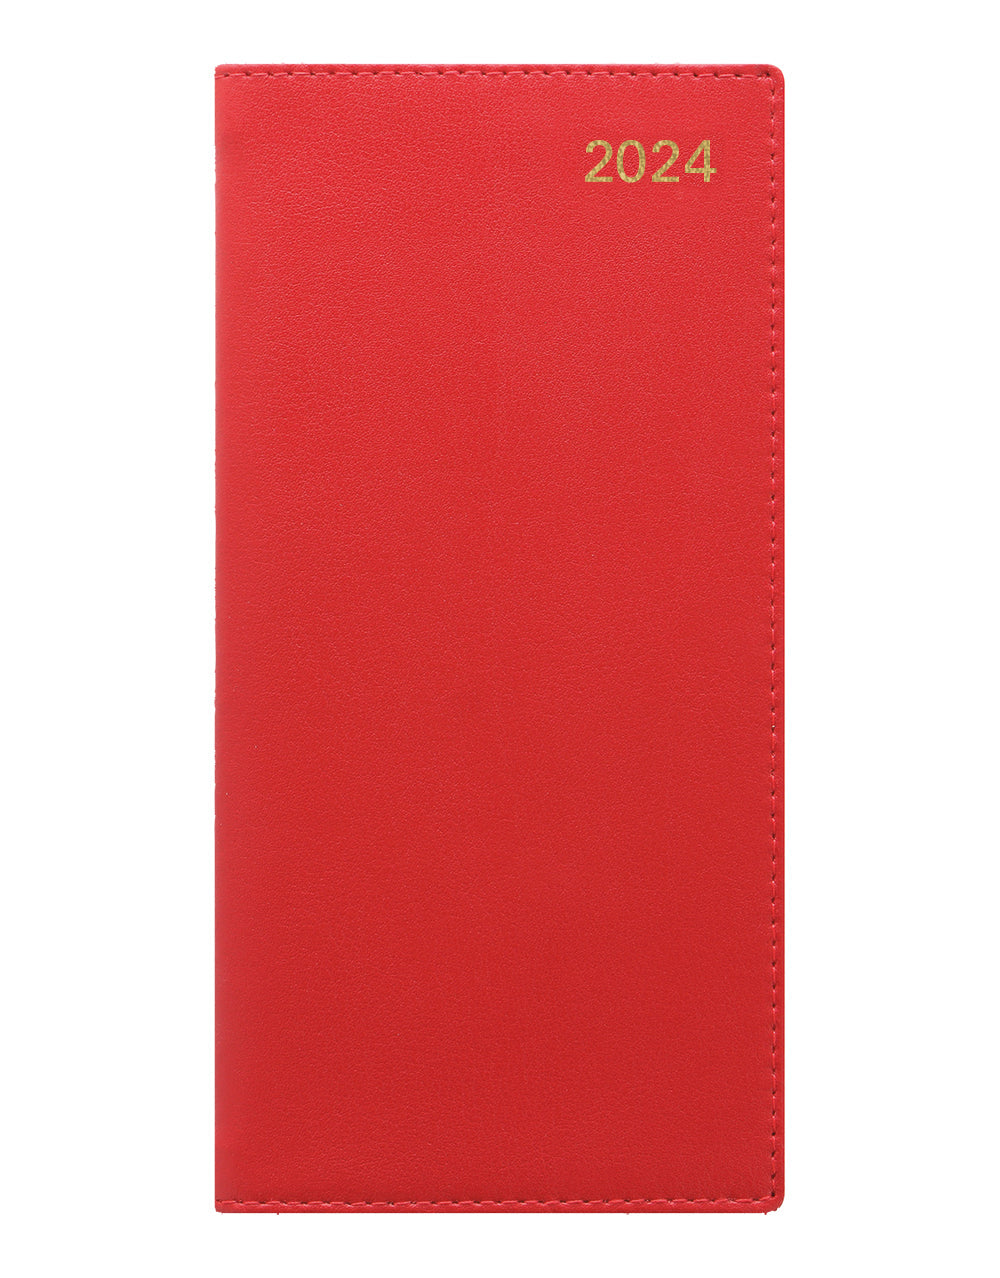 Letts of London 2024 Belgravia Slim Week to View Leather Planner - Red